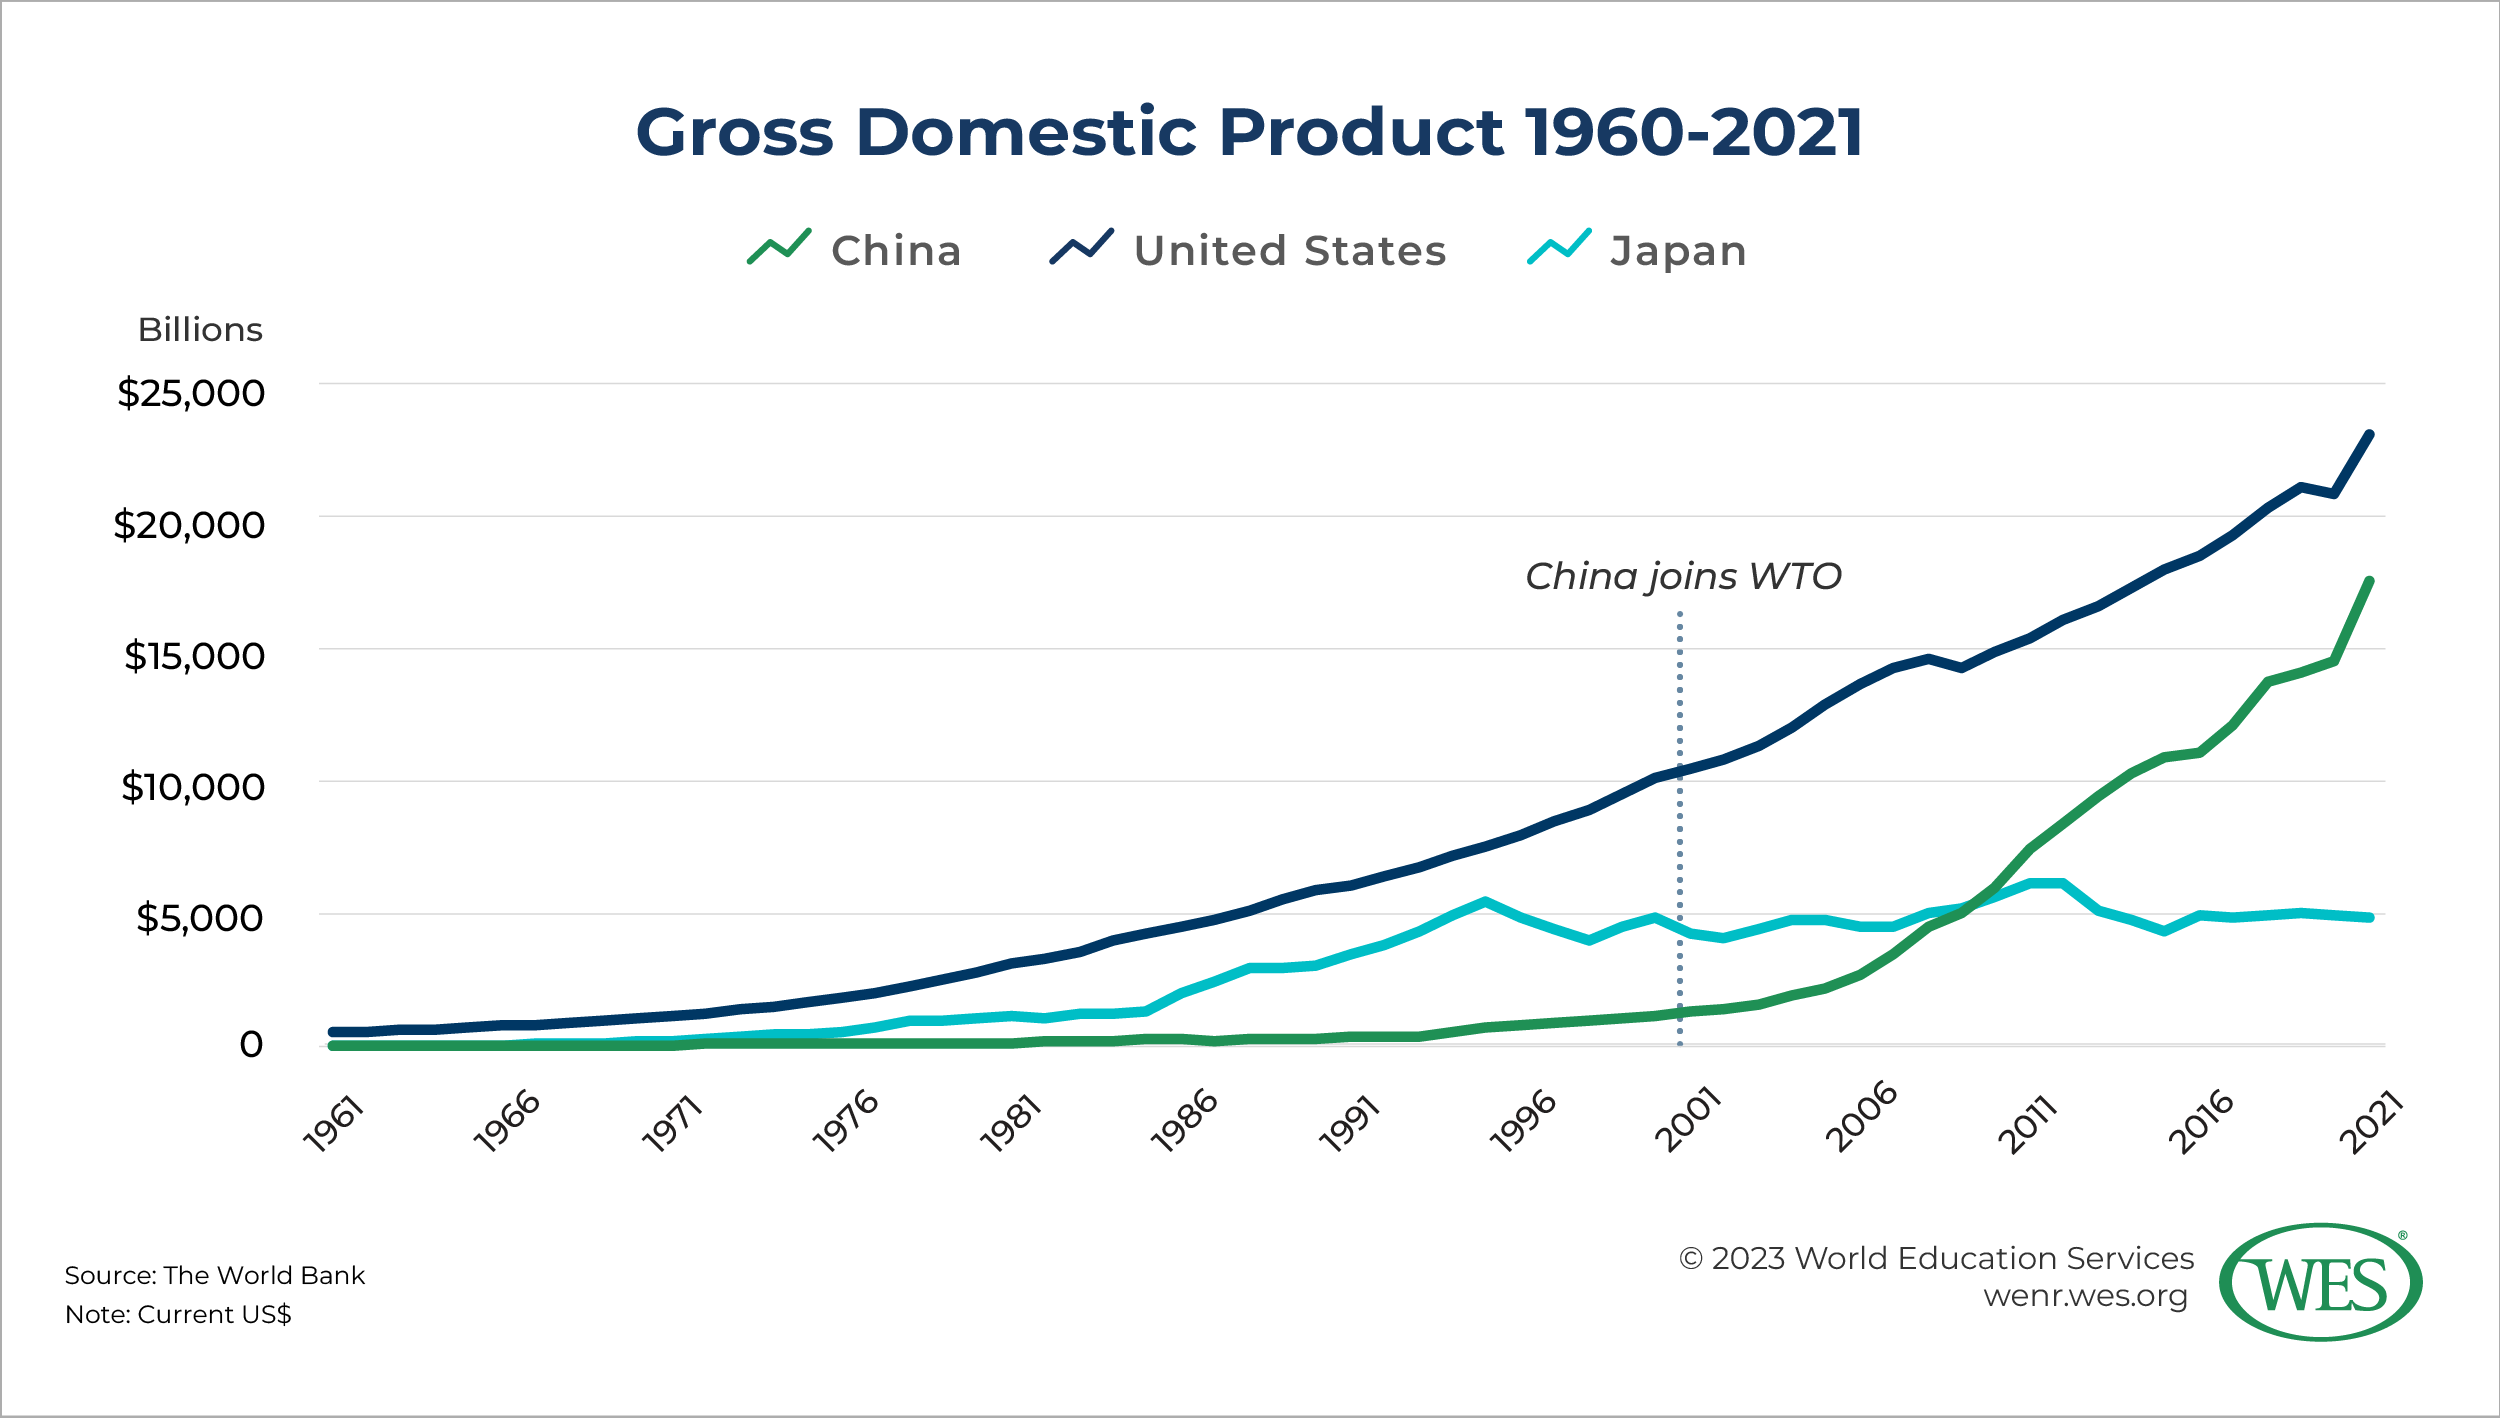 A line chart showing gross domestic product for China, the United States, and Japan from 1961 to 2021. 